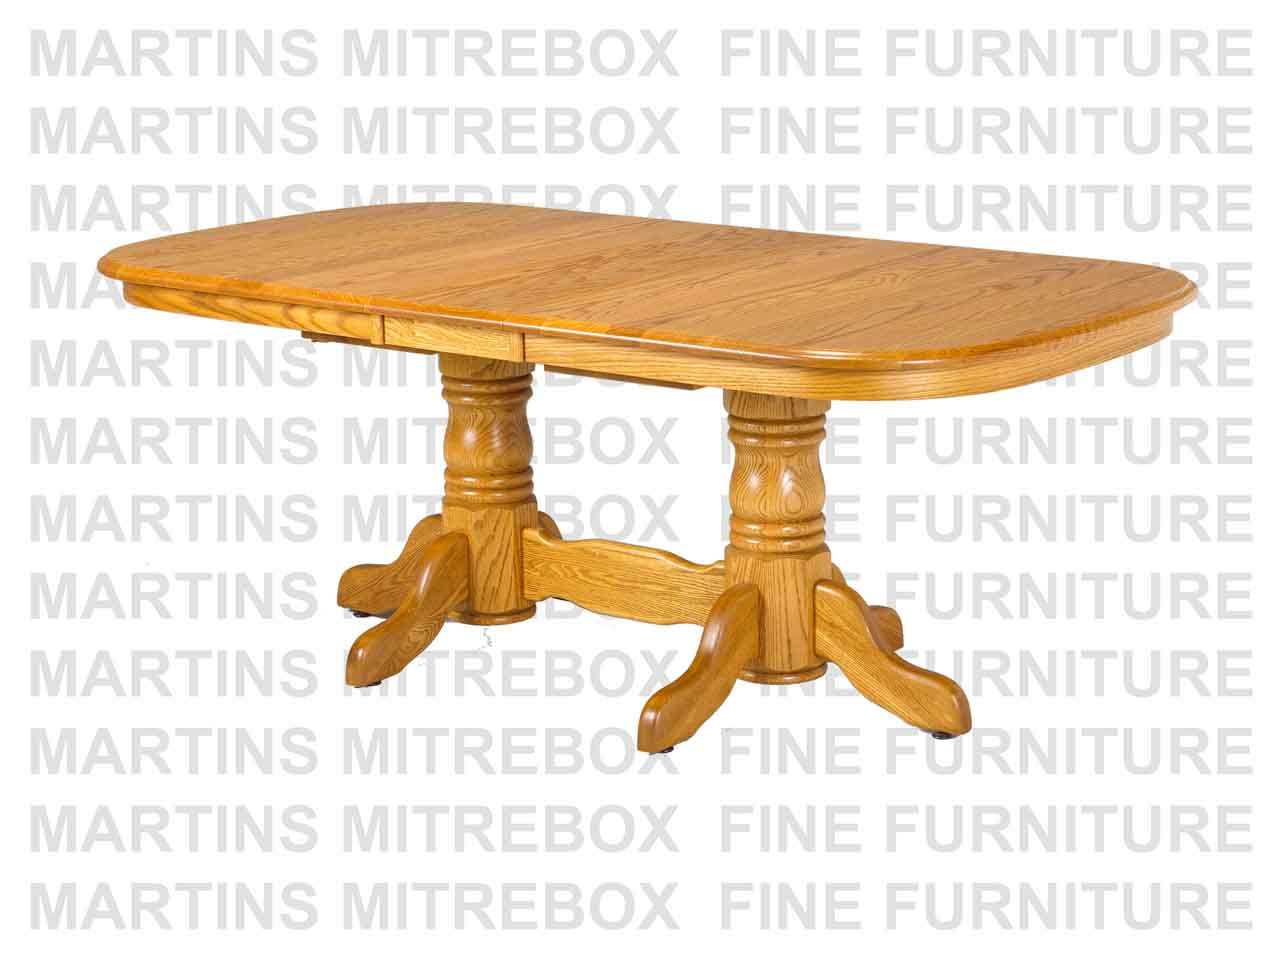 Oak Martin Collection Double Pedestal Table 42''D x 84''W x 30''H With 3 - 12'' Leaves Table Has 1.25'' Thick Top